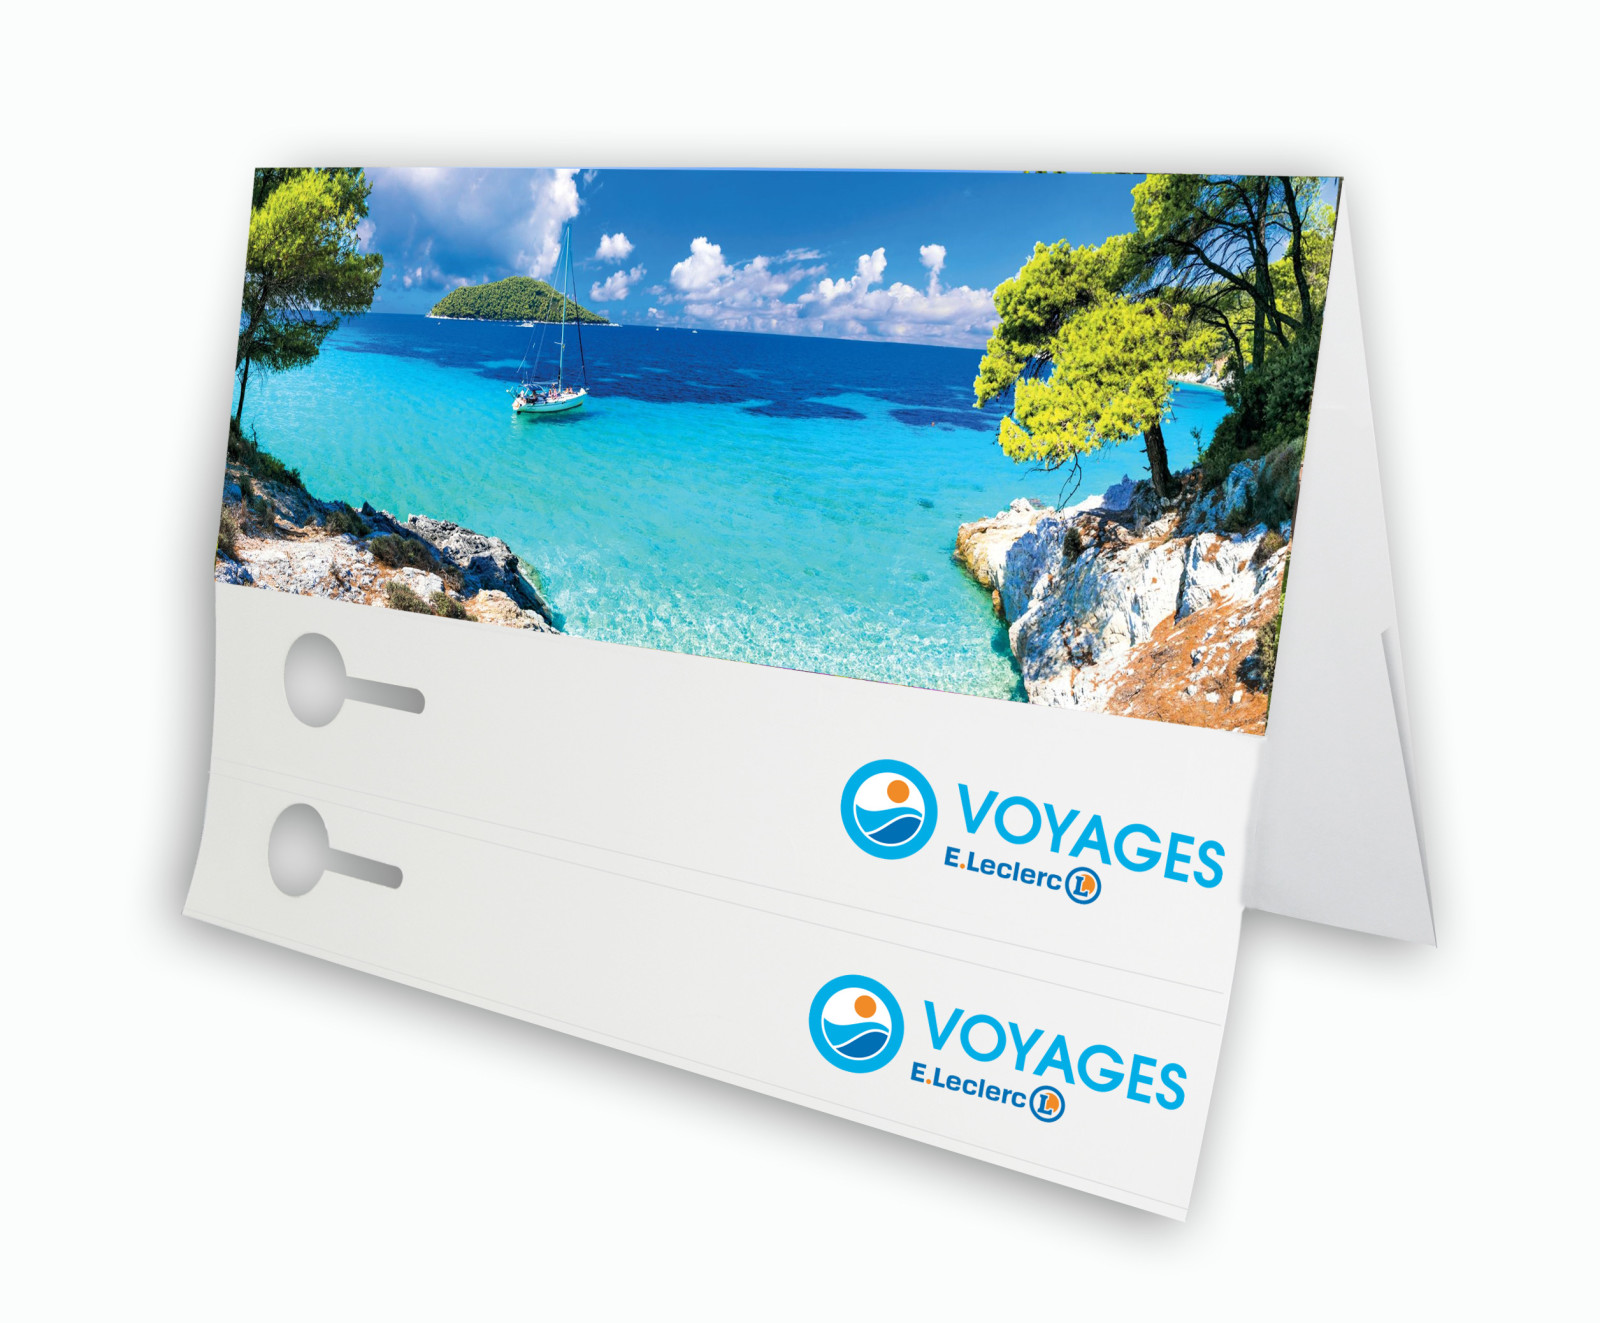 CARNET LECLERC VOYAGES All in One® / Leclerc Voyages